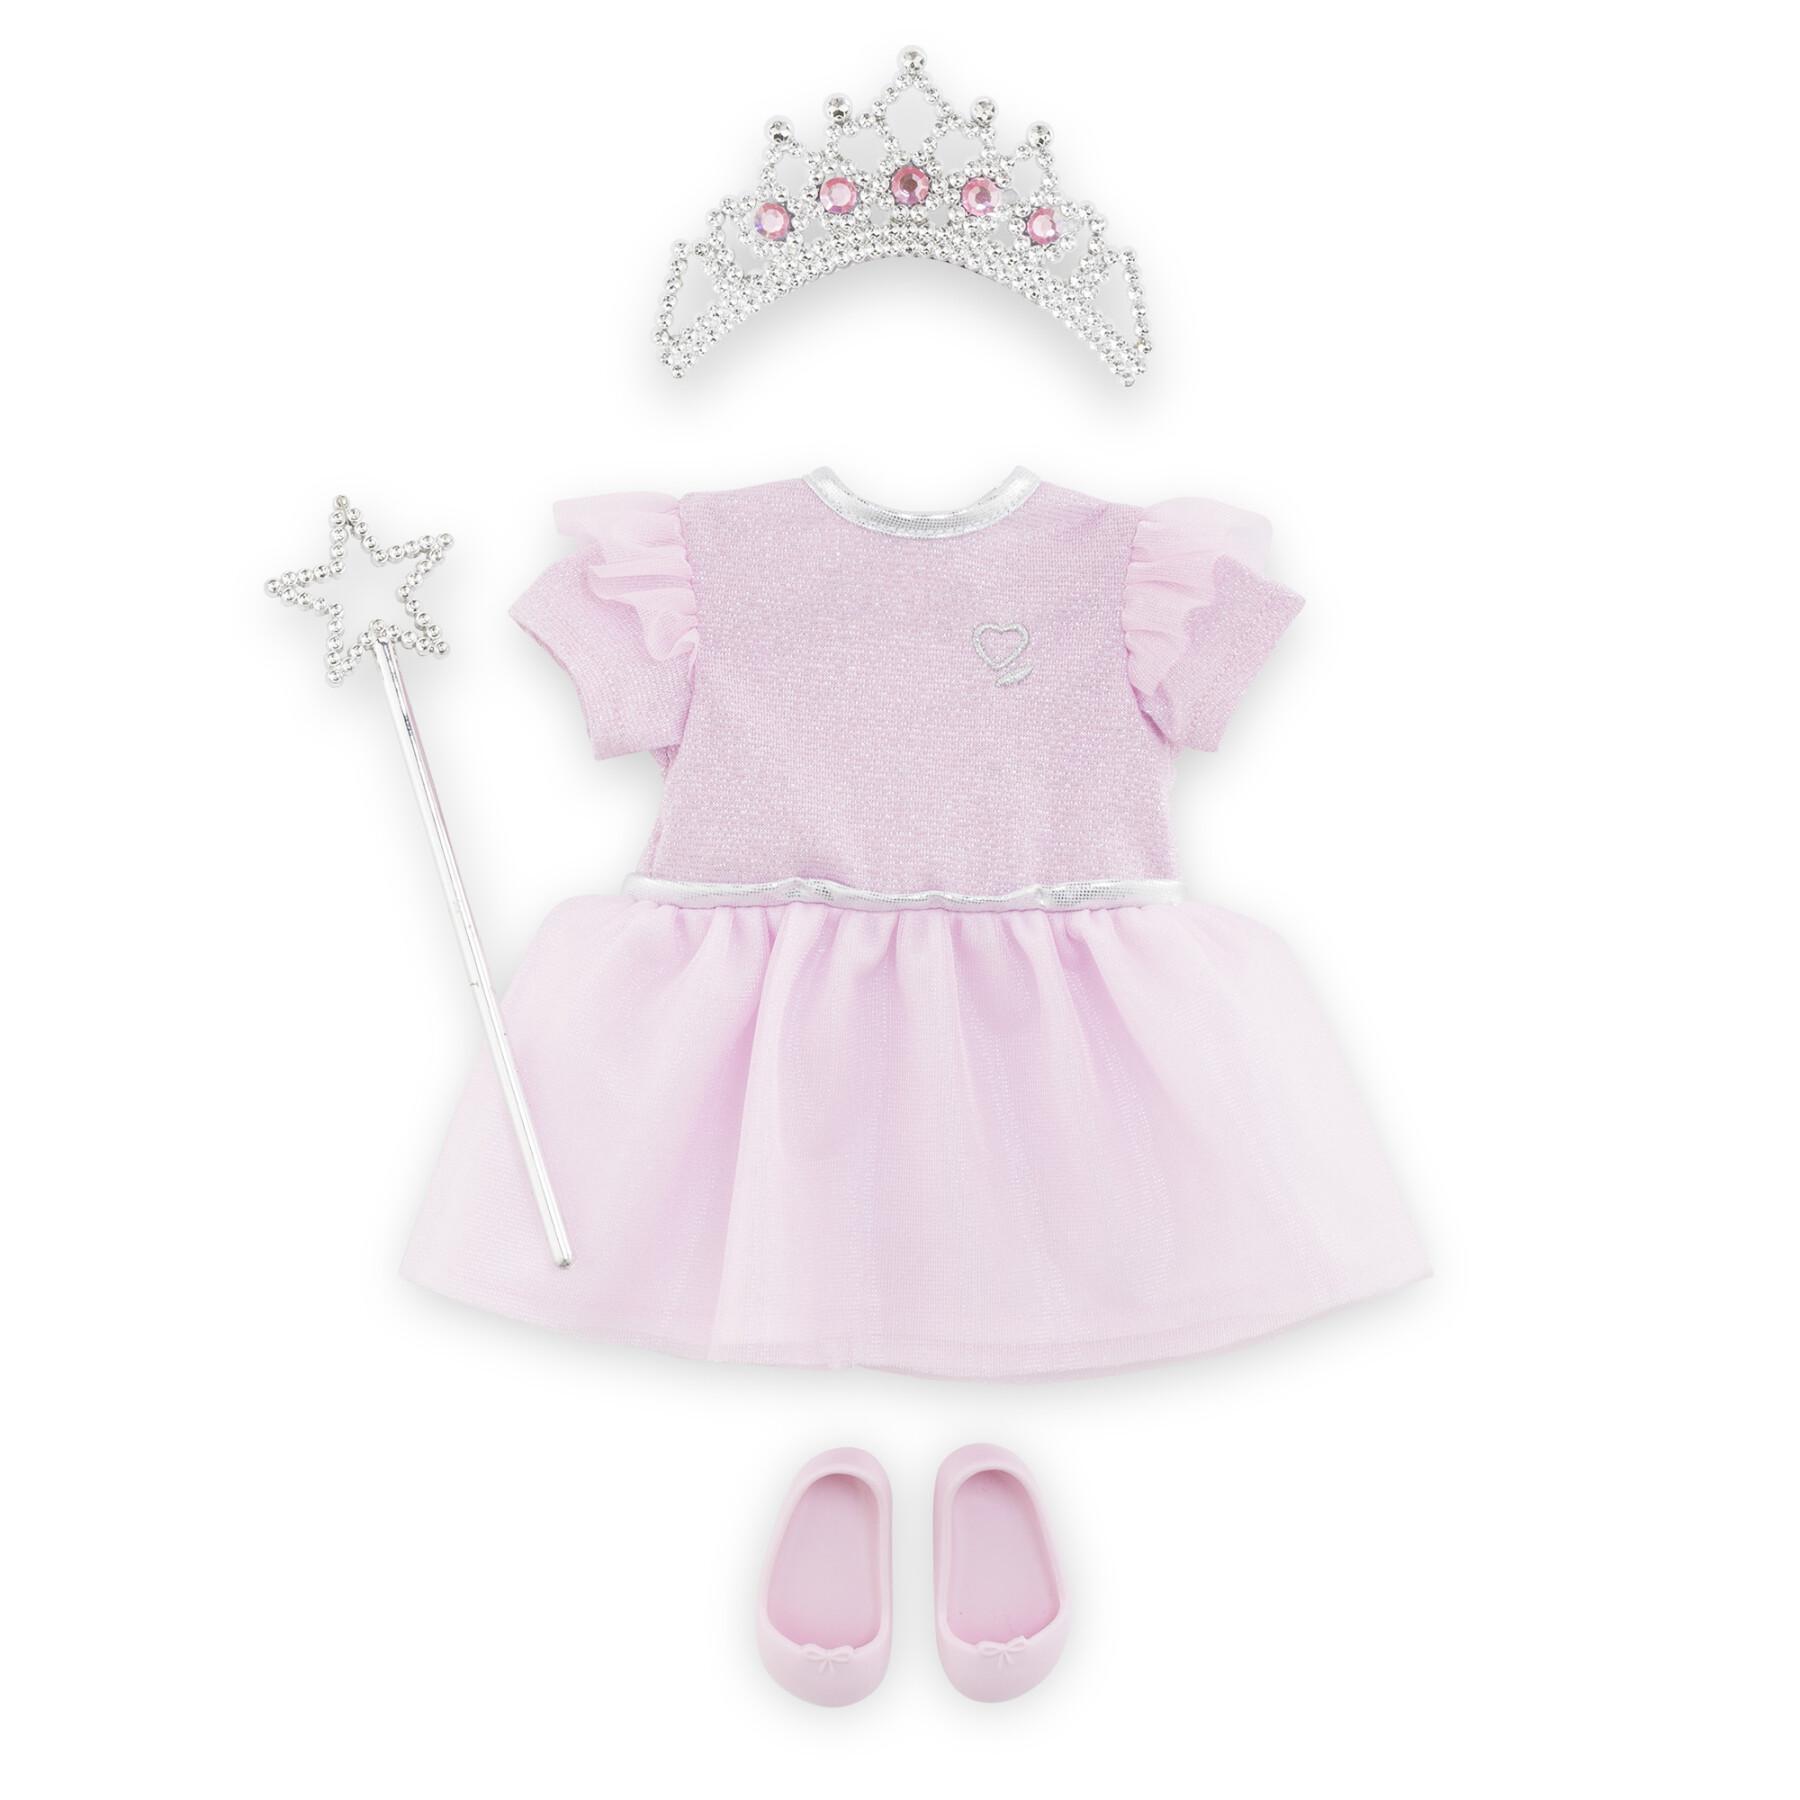 Princess set with doll accessories Corolle